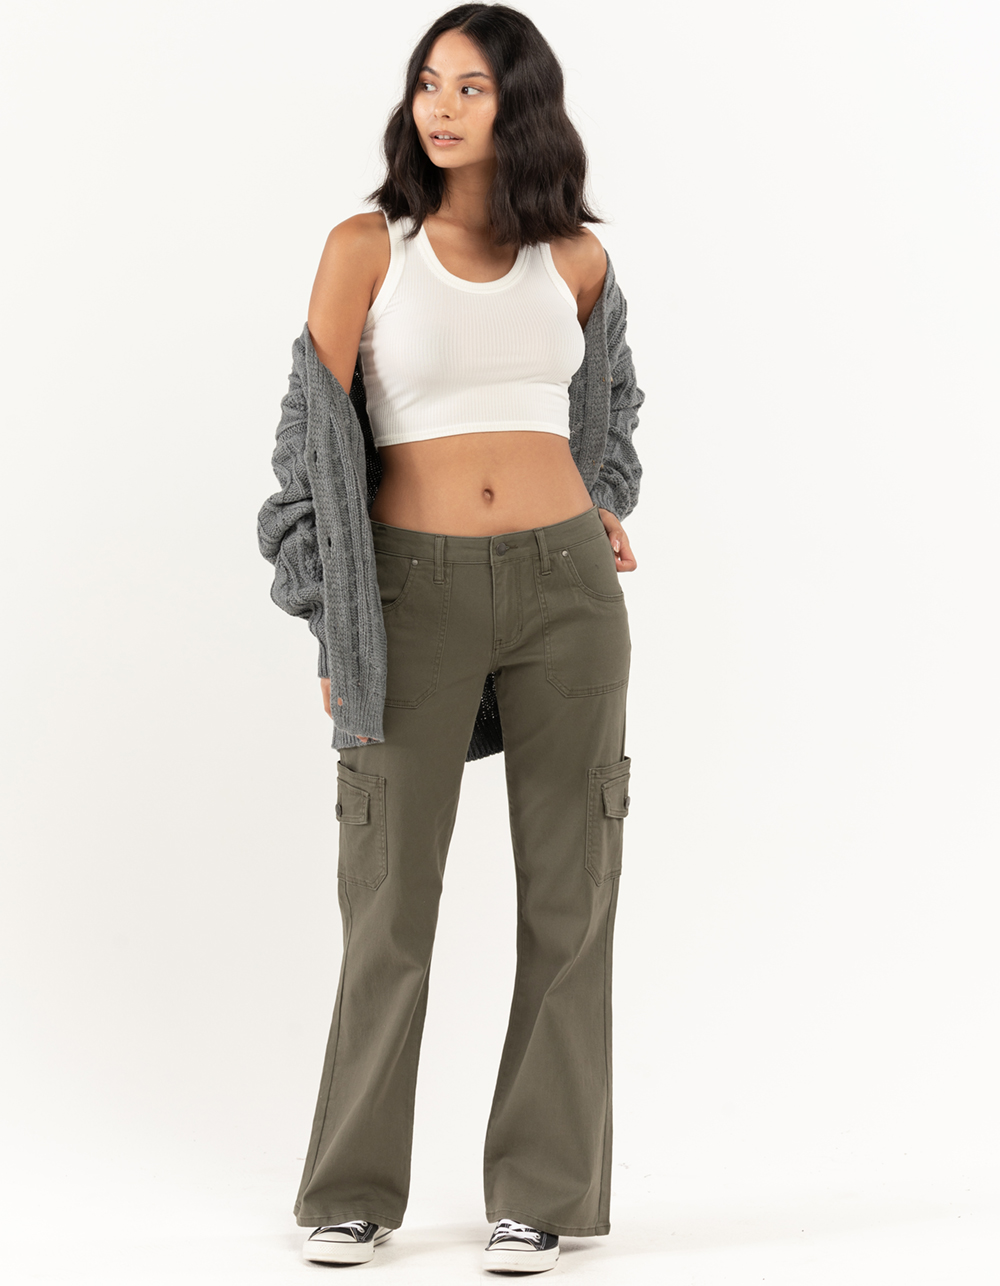 Top more than 76 low rise cargo pants latest - in.eteachers